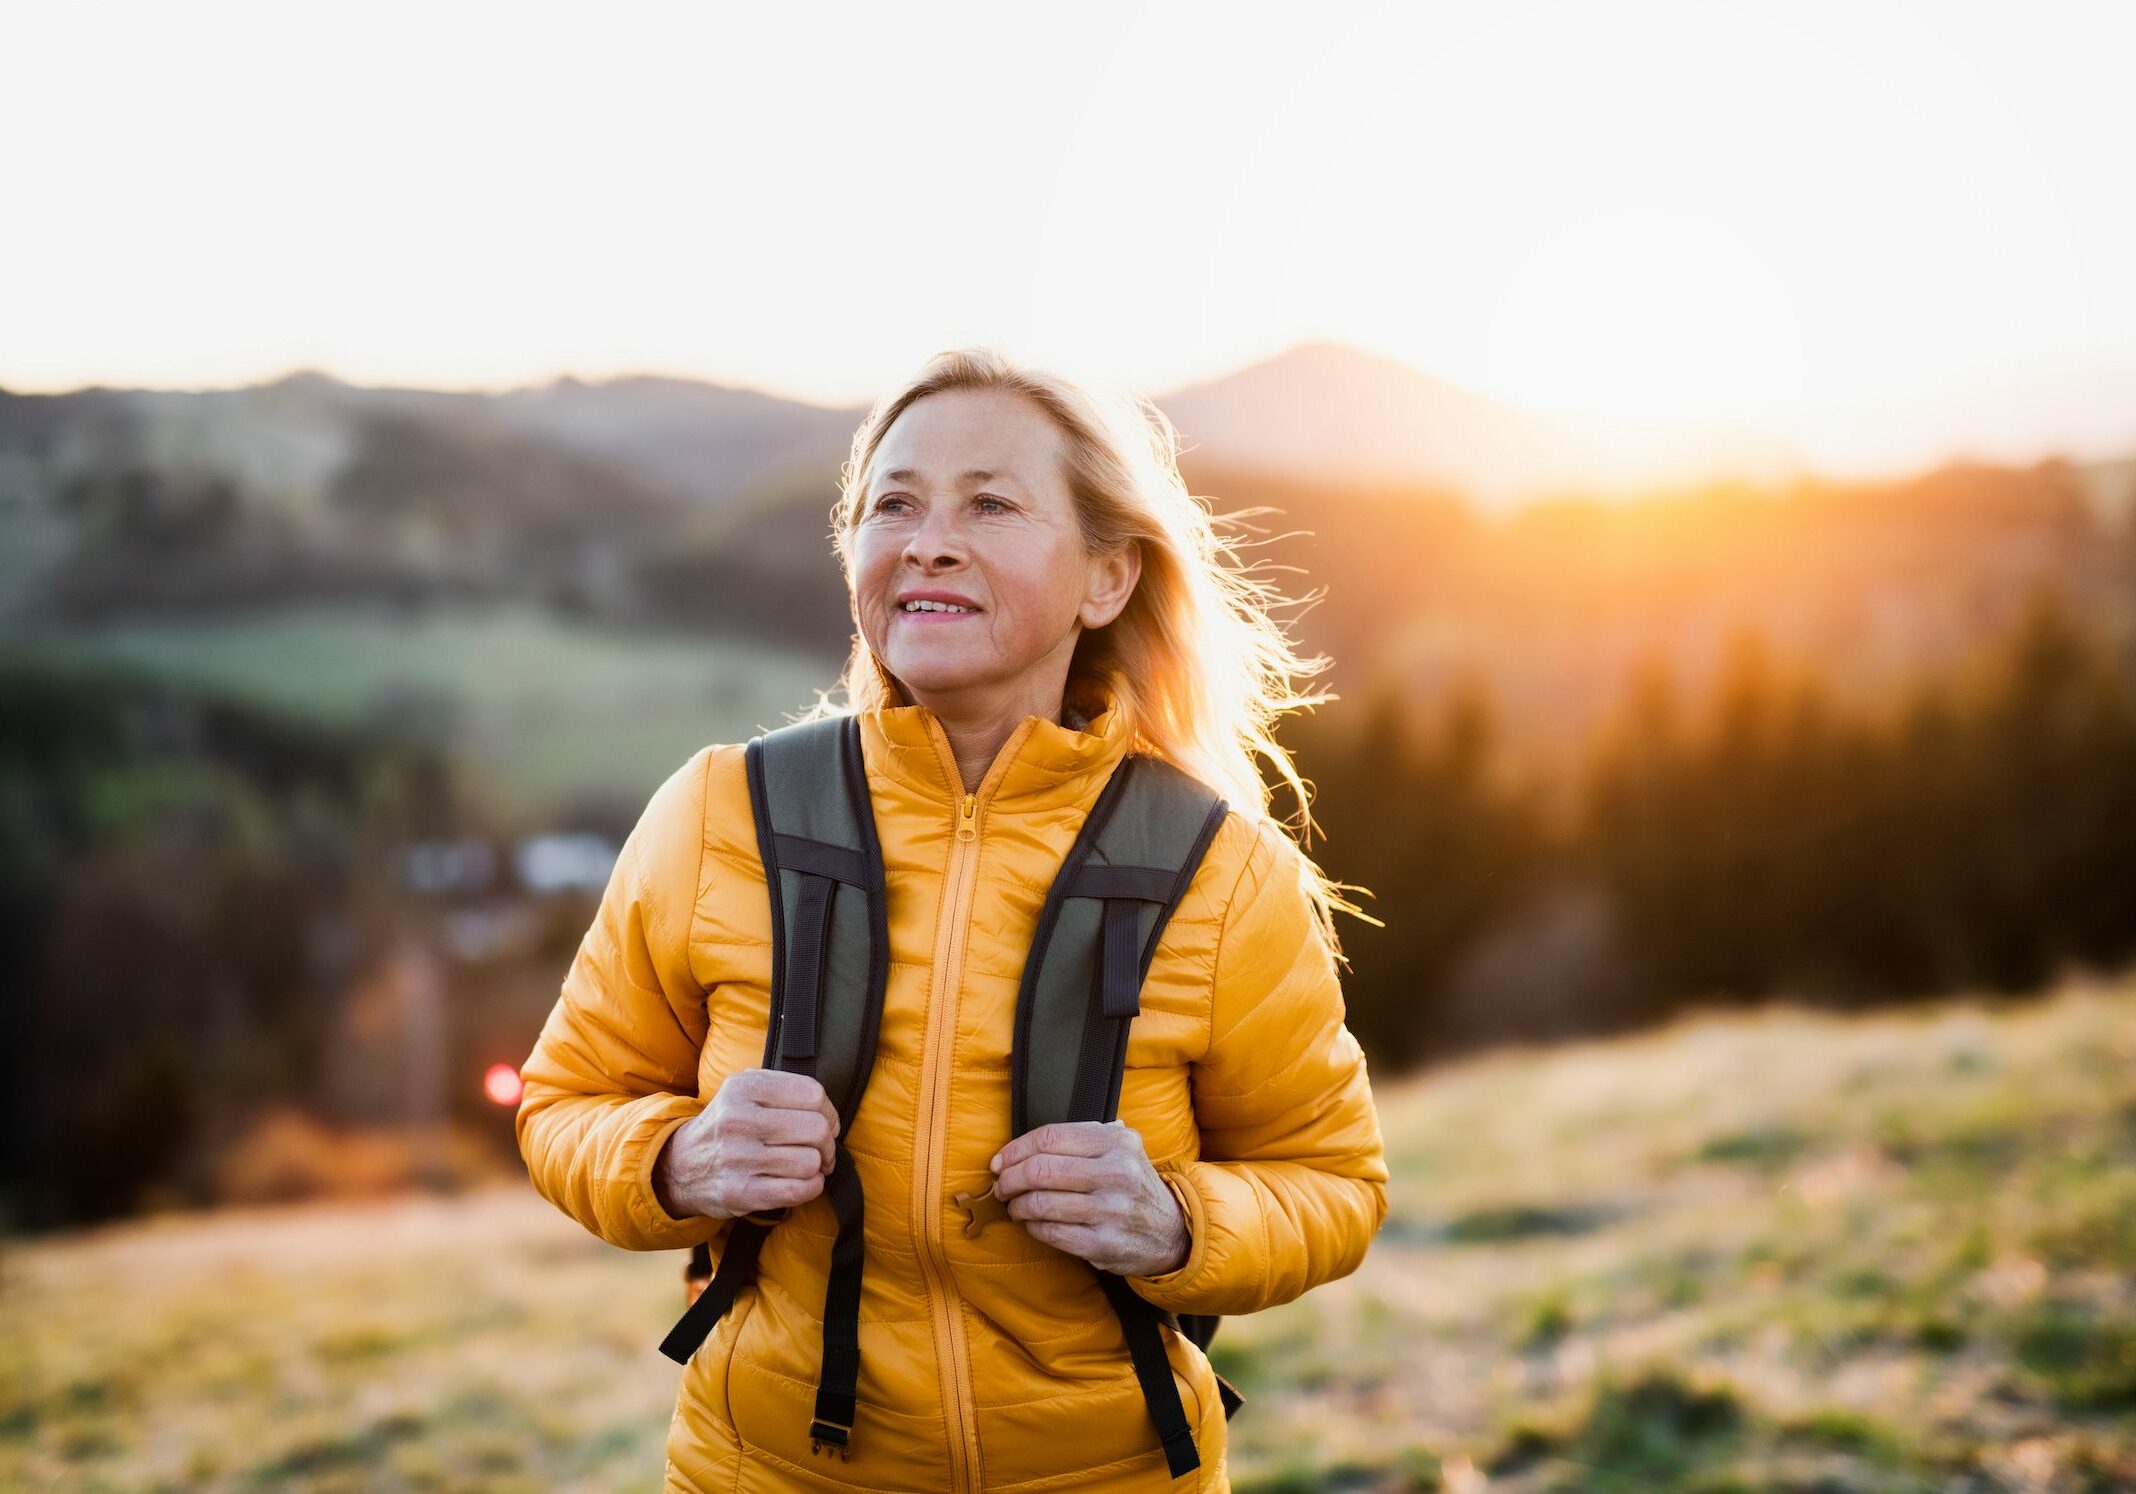 Attractive senior woman with backpack walking outdoors in nature at sunset, hiking.